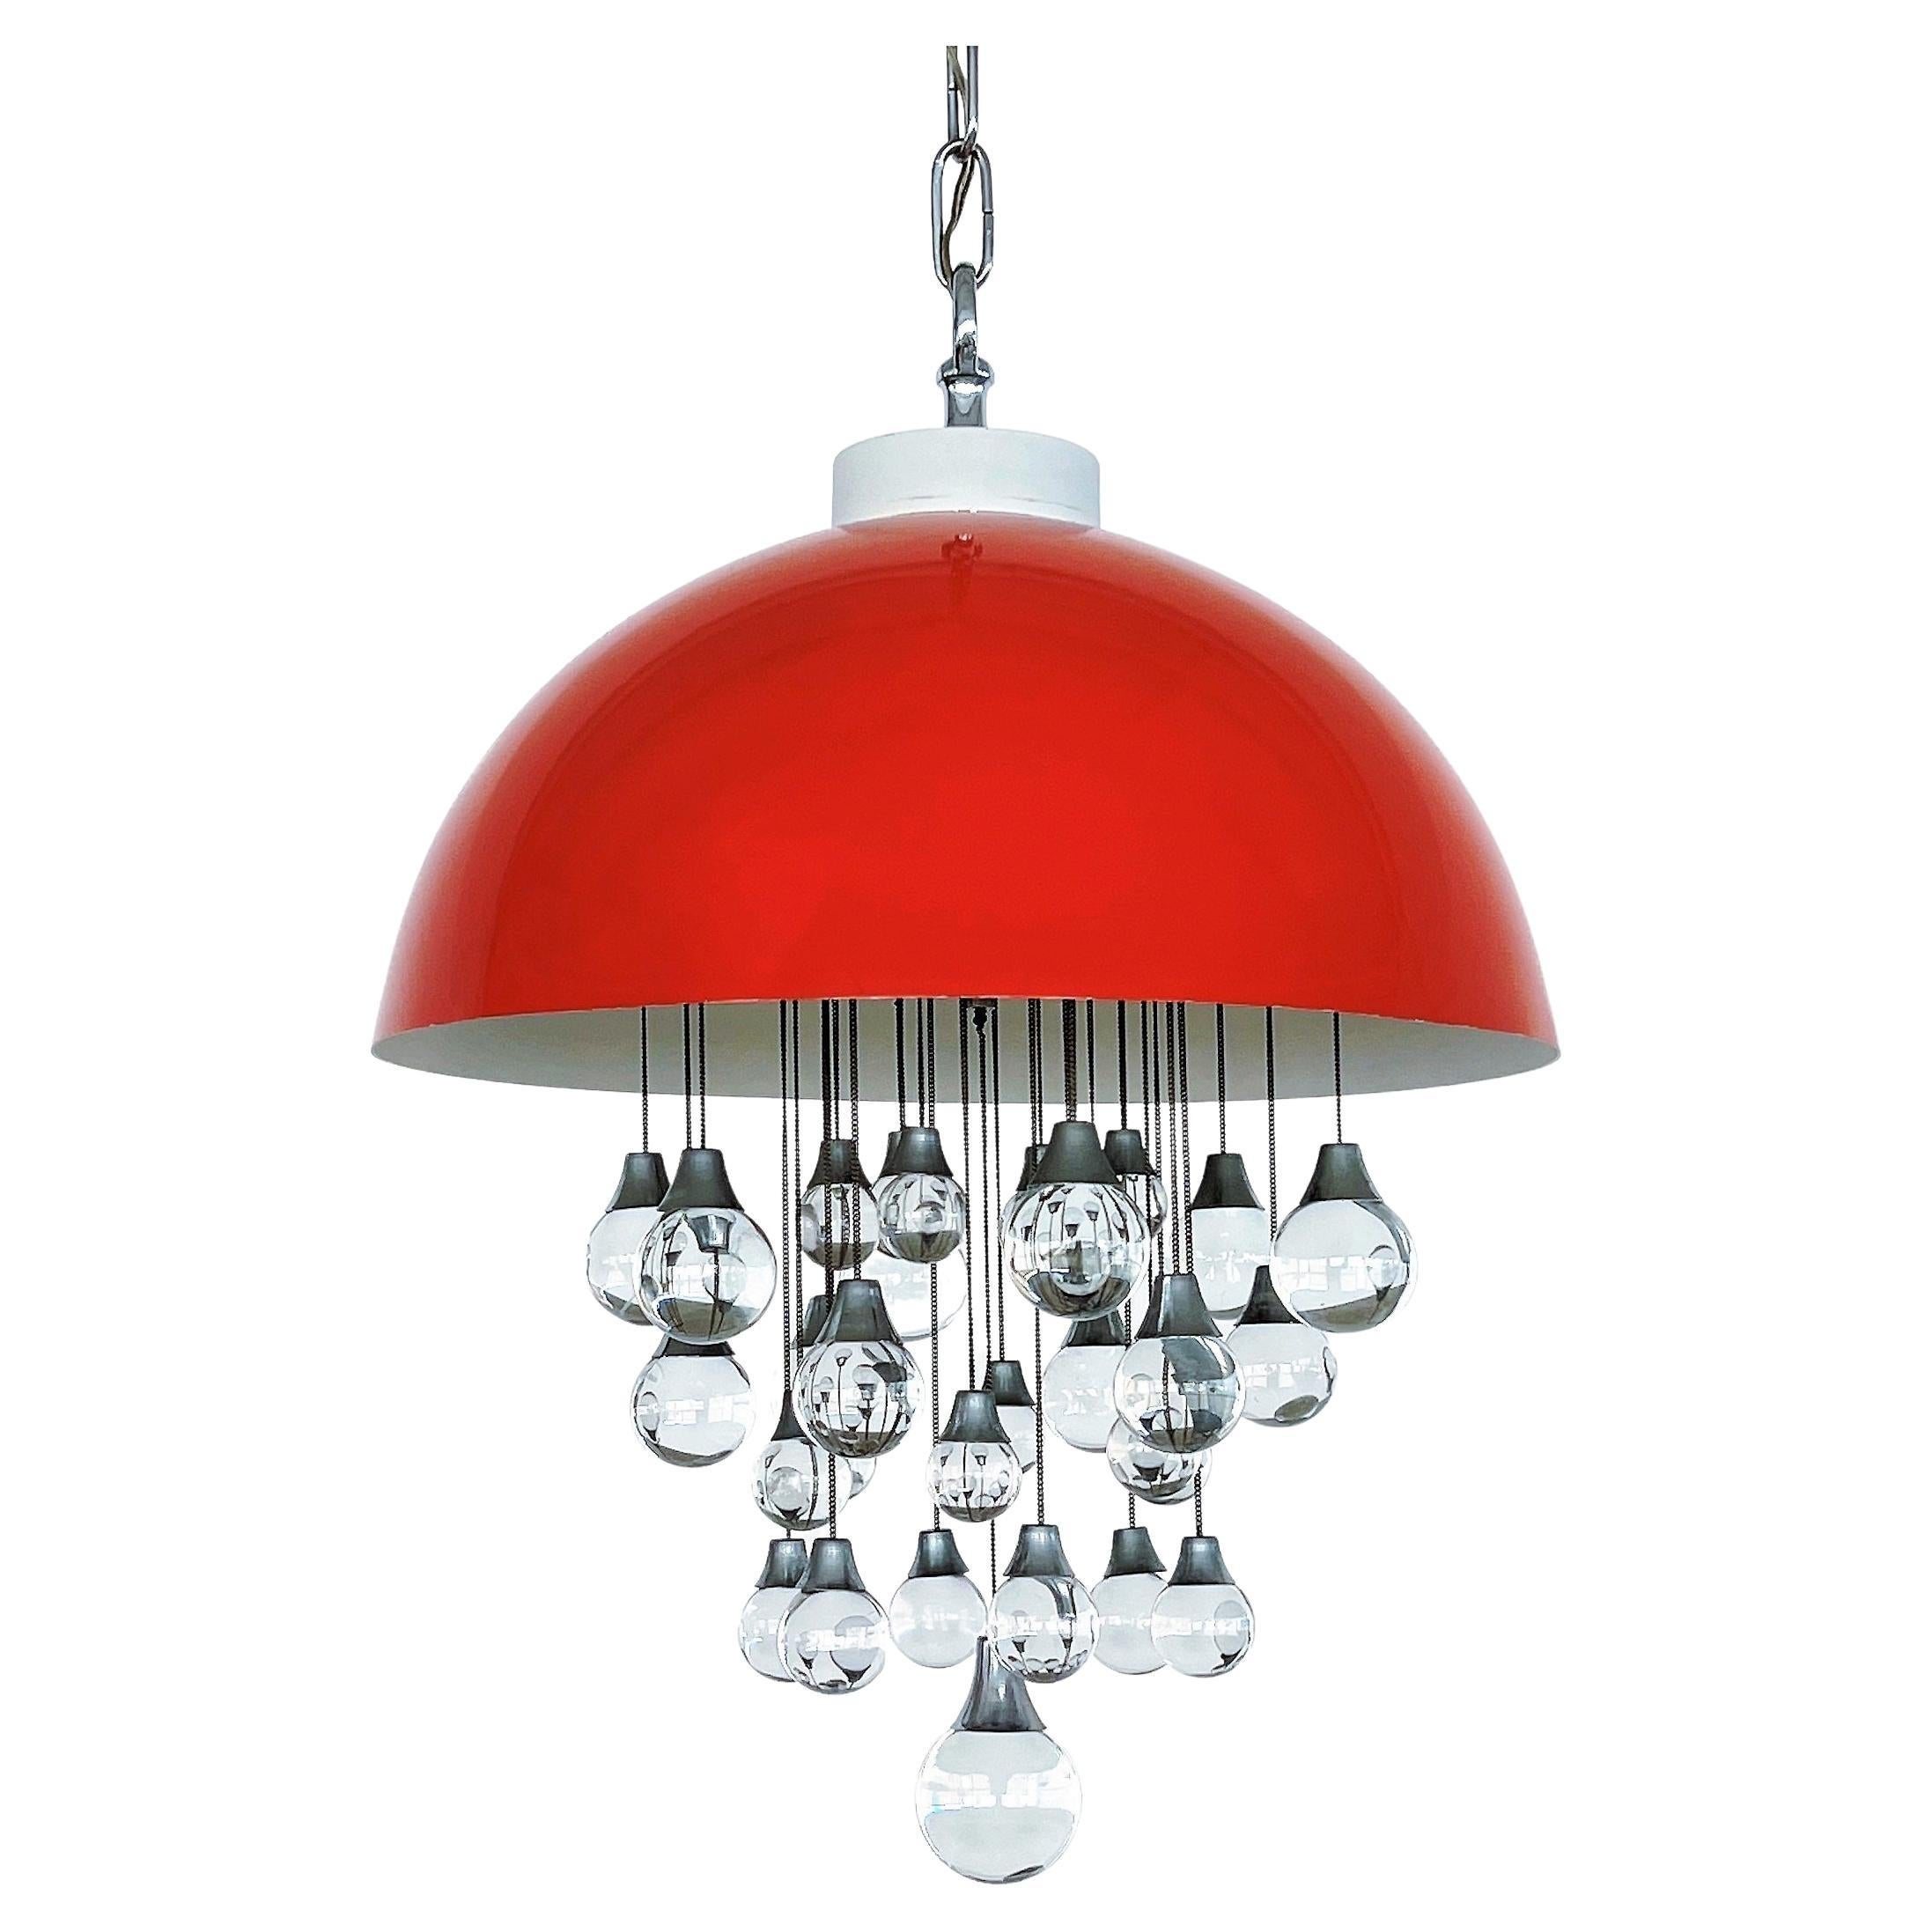 Italian Space Age Pendant Lamp in Metal with Glass Spheres, 1980s For Sale